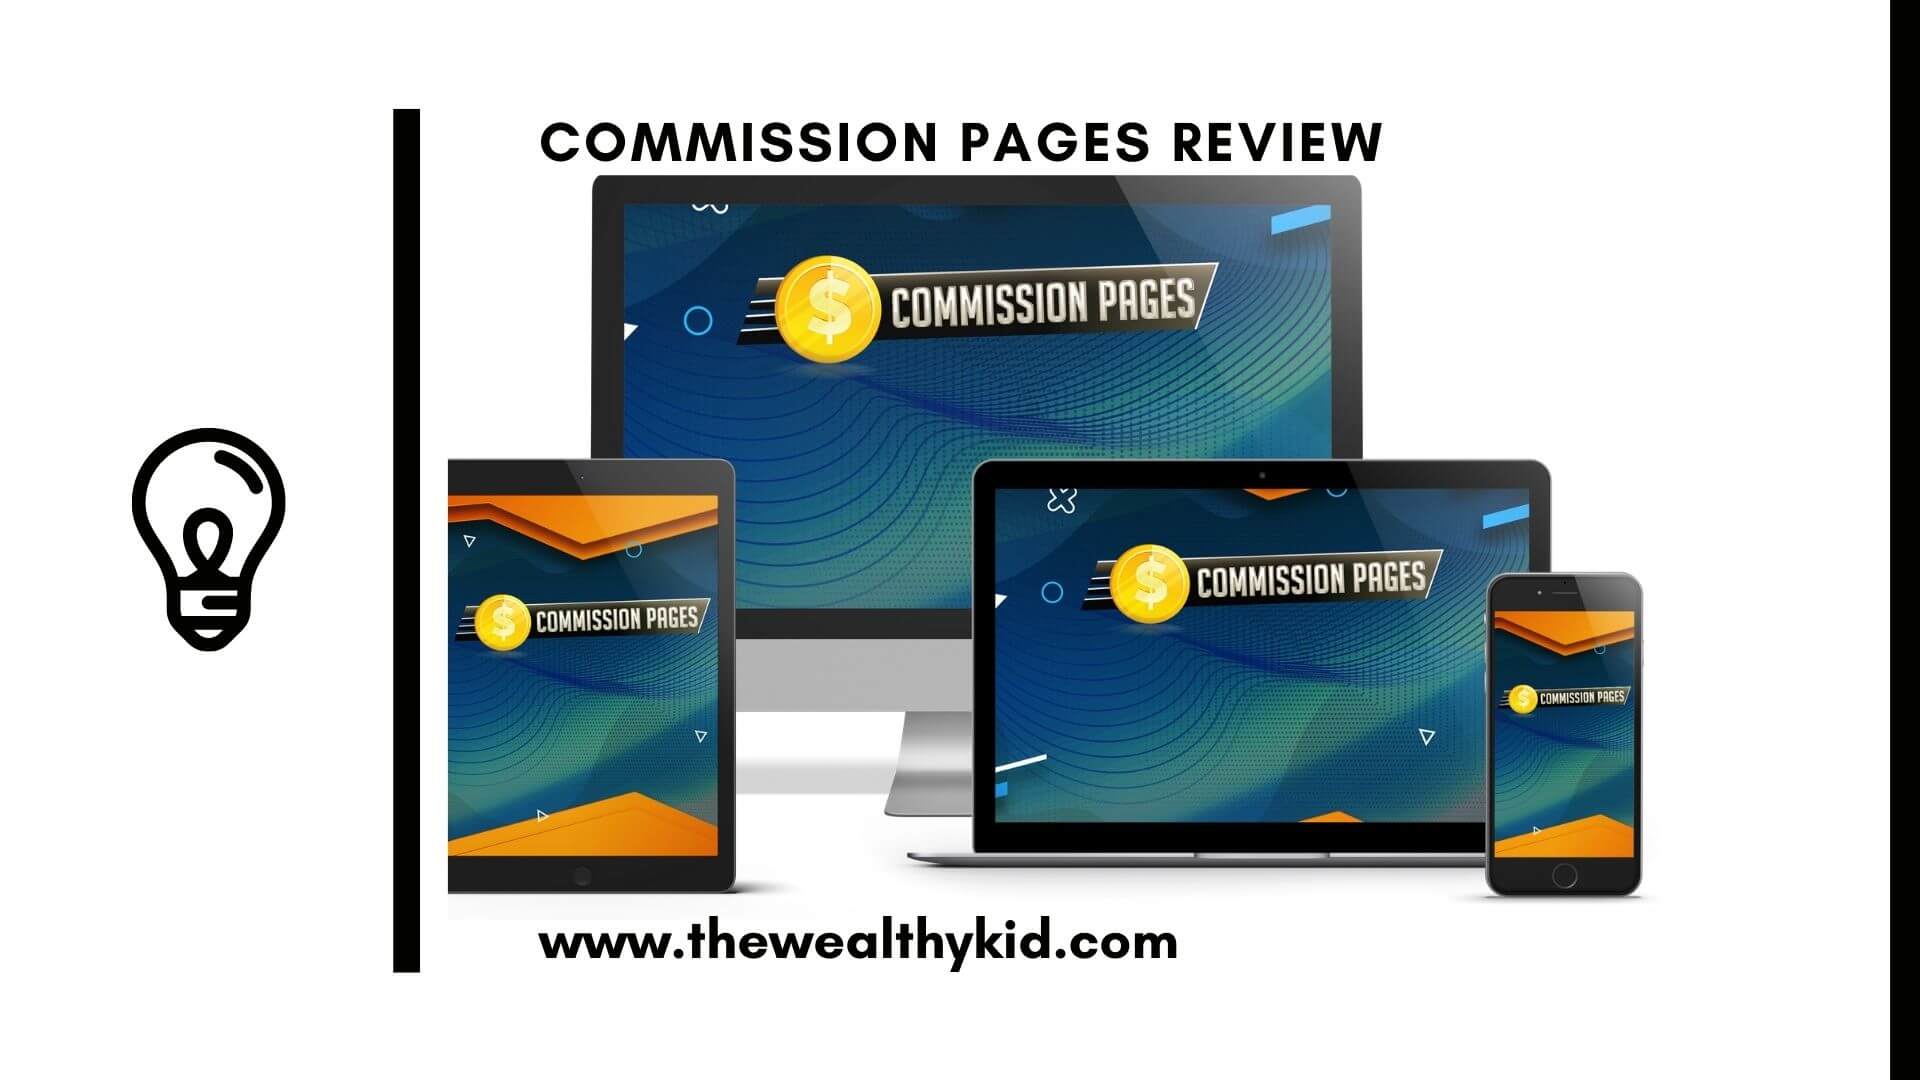 Commission Pages Review-Just Another Typical Shiny Object!